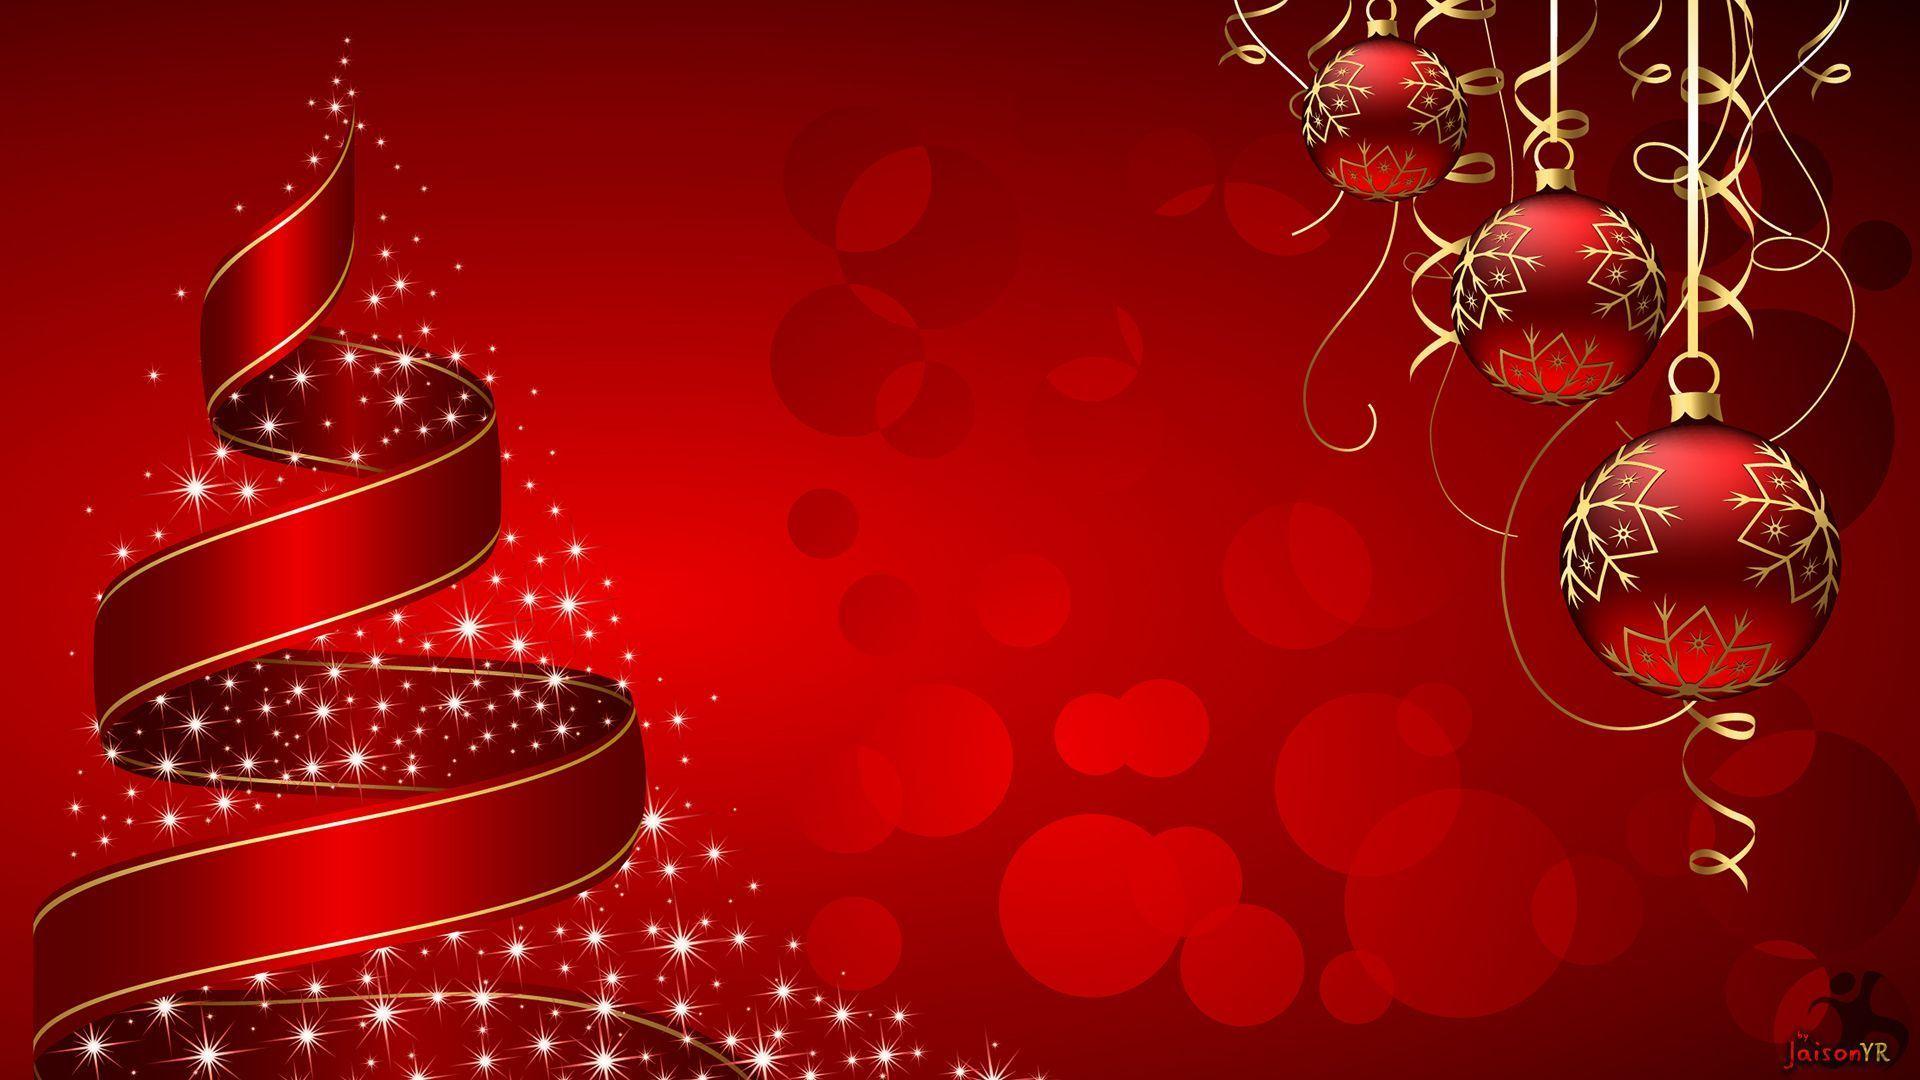 Christmas Background 9 cool hq 408095 High Definition Wallpaper